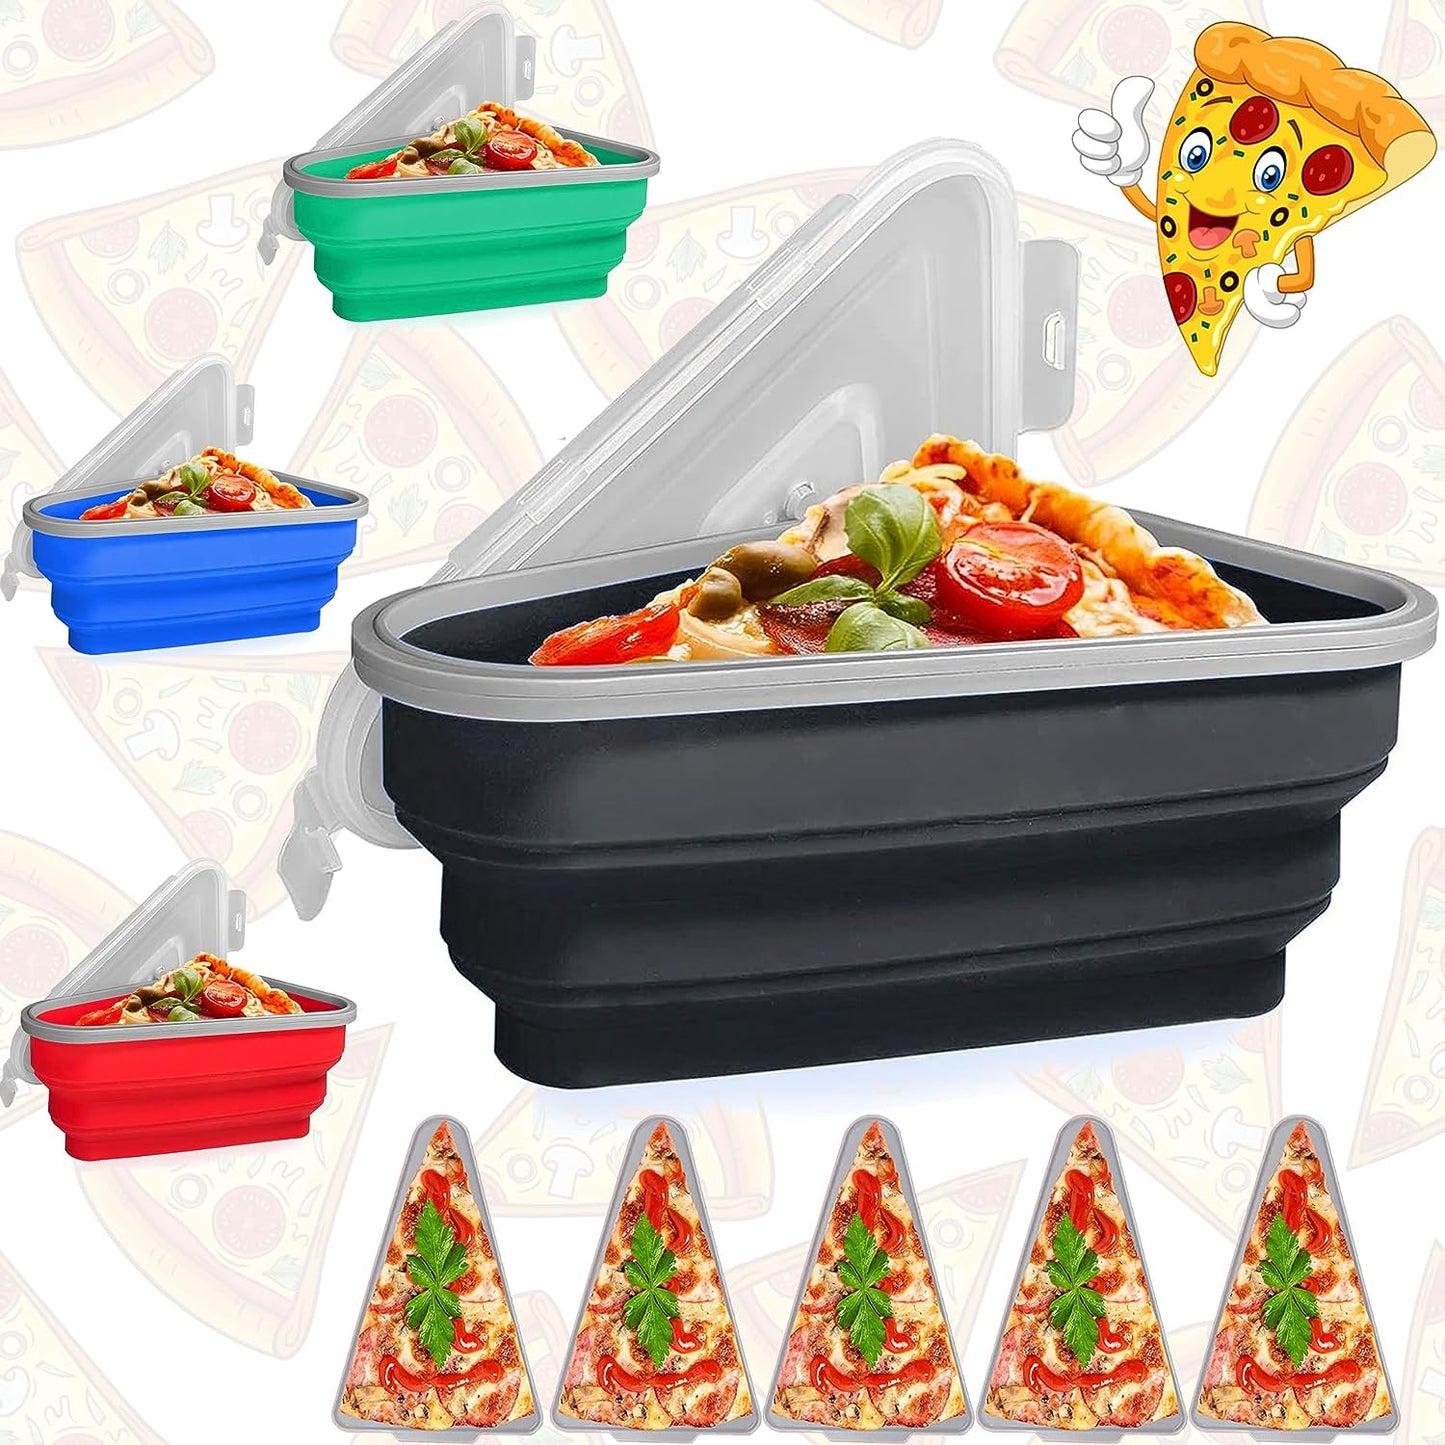 Al Razaak Pizza Storage Container Silicone Collapsible includes 5 trays, Reusable Pizza Storage Container, Saves Fridge Space - Microwave & Dishwasher Safe, Pizza Slice Pack Storage Container Expandable, Leftover Pizza Slice Storage Container Saver, Silic